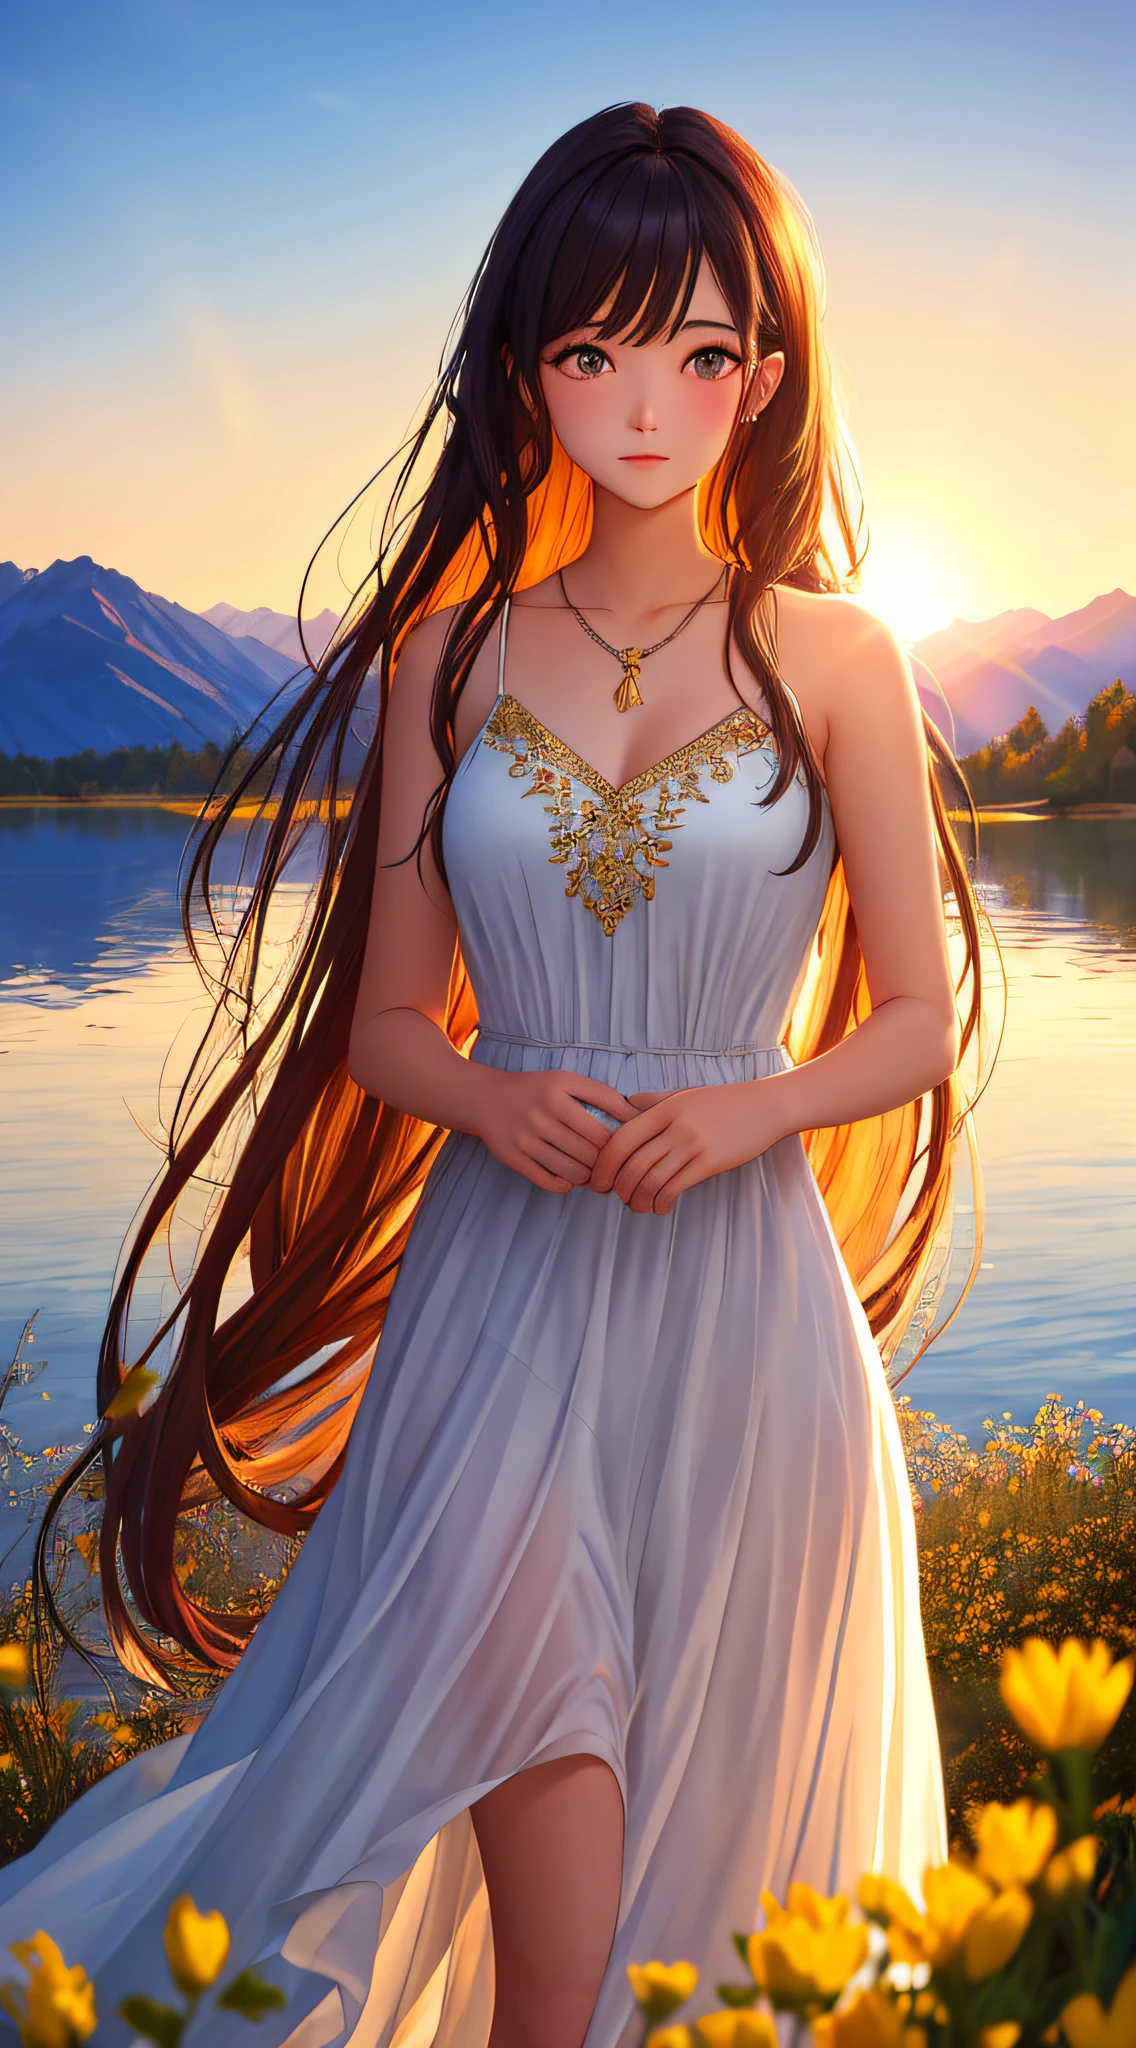 ((masterpiece,best quality,extremely detailed,ultra high res,detailed background)),1 girl,serene expression,mesmerizing eyes,straight long hair,flowing dress,poised posture,porcelain skin,subtle blush,crystal pendant,BREAK 
golden hour,((rim lighting)),warm tones,sun flare,soft shadows,vibrant colors,painterly effect,dreamy atmosphere,BREAK 
scenic lake,distant mountains,willow tree,calm water,reflection,sunlit clouds,peaceful ambiance,idyllic sunset,